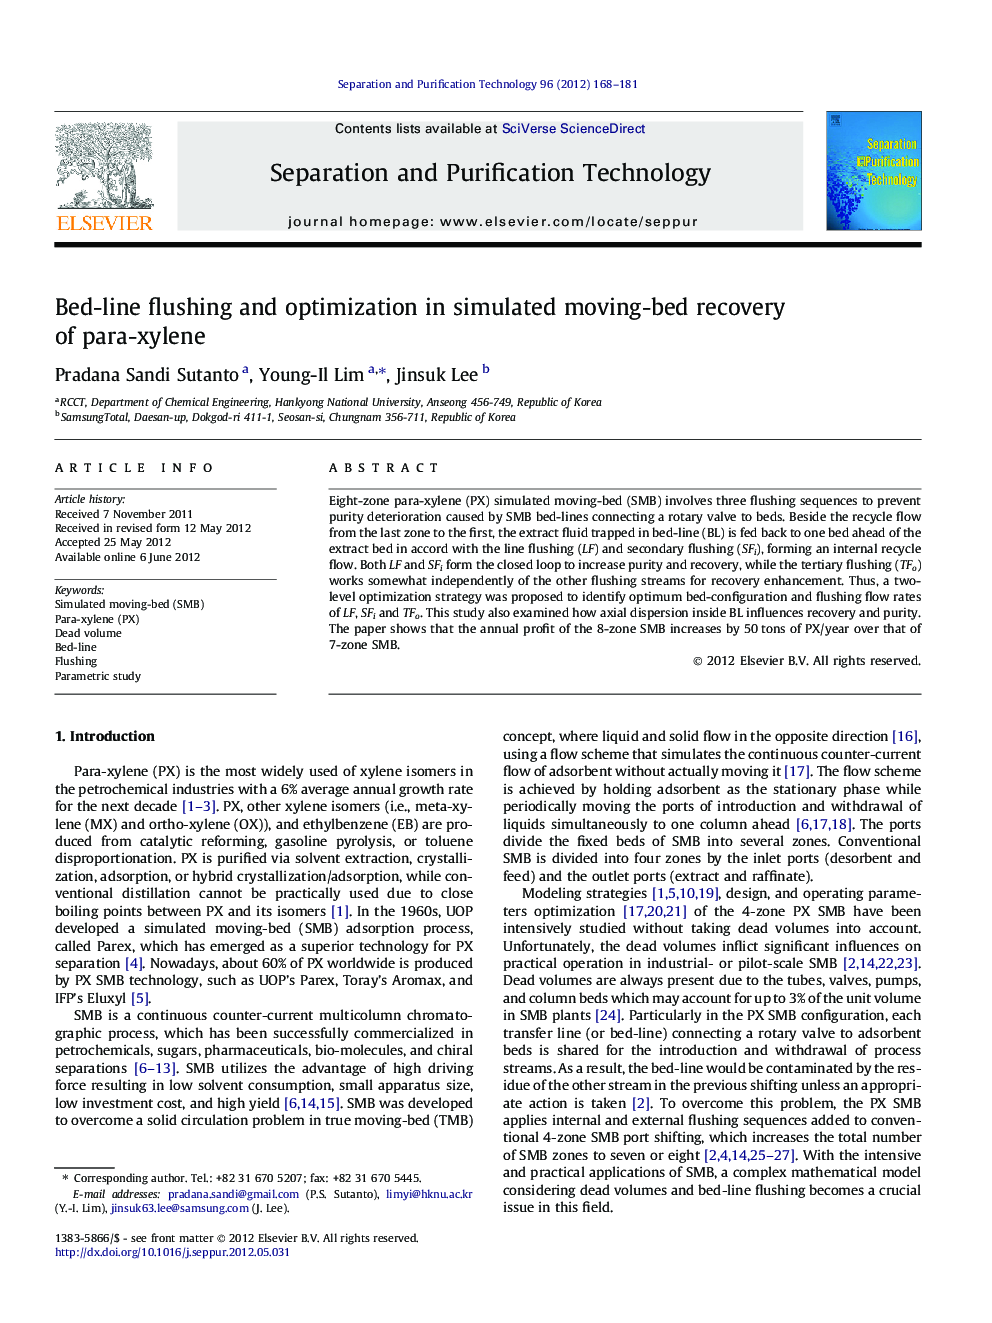 Bed-line flushing and optimization in simulated moving-bed recovery of para-xylene